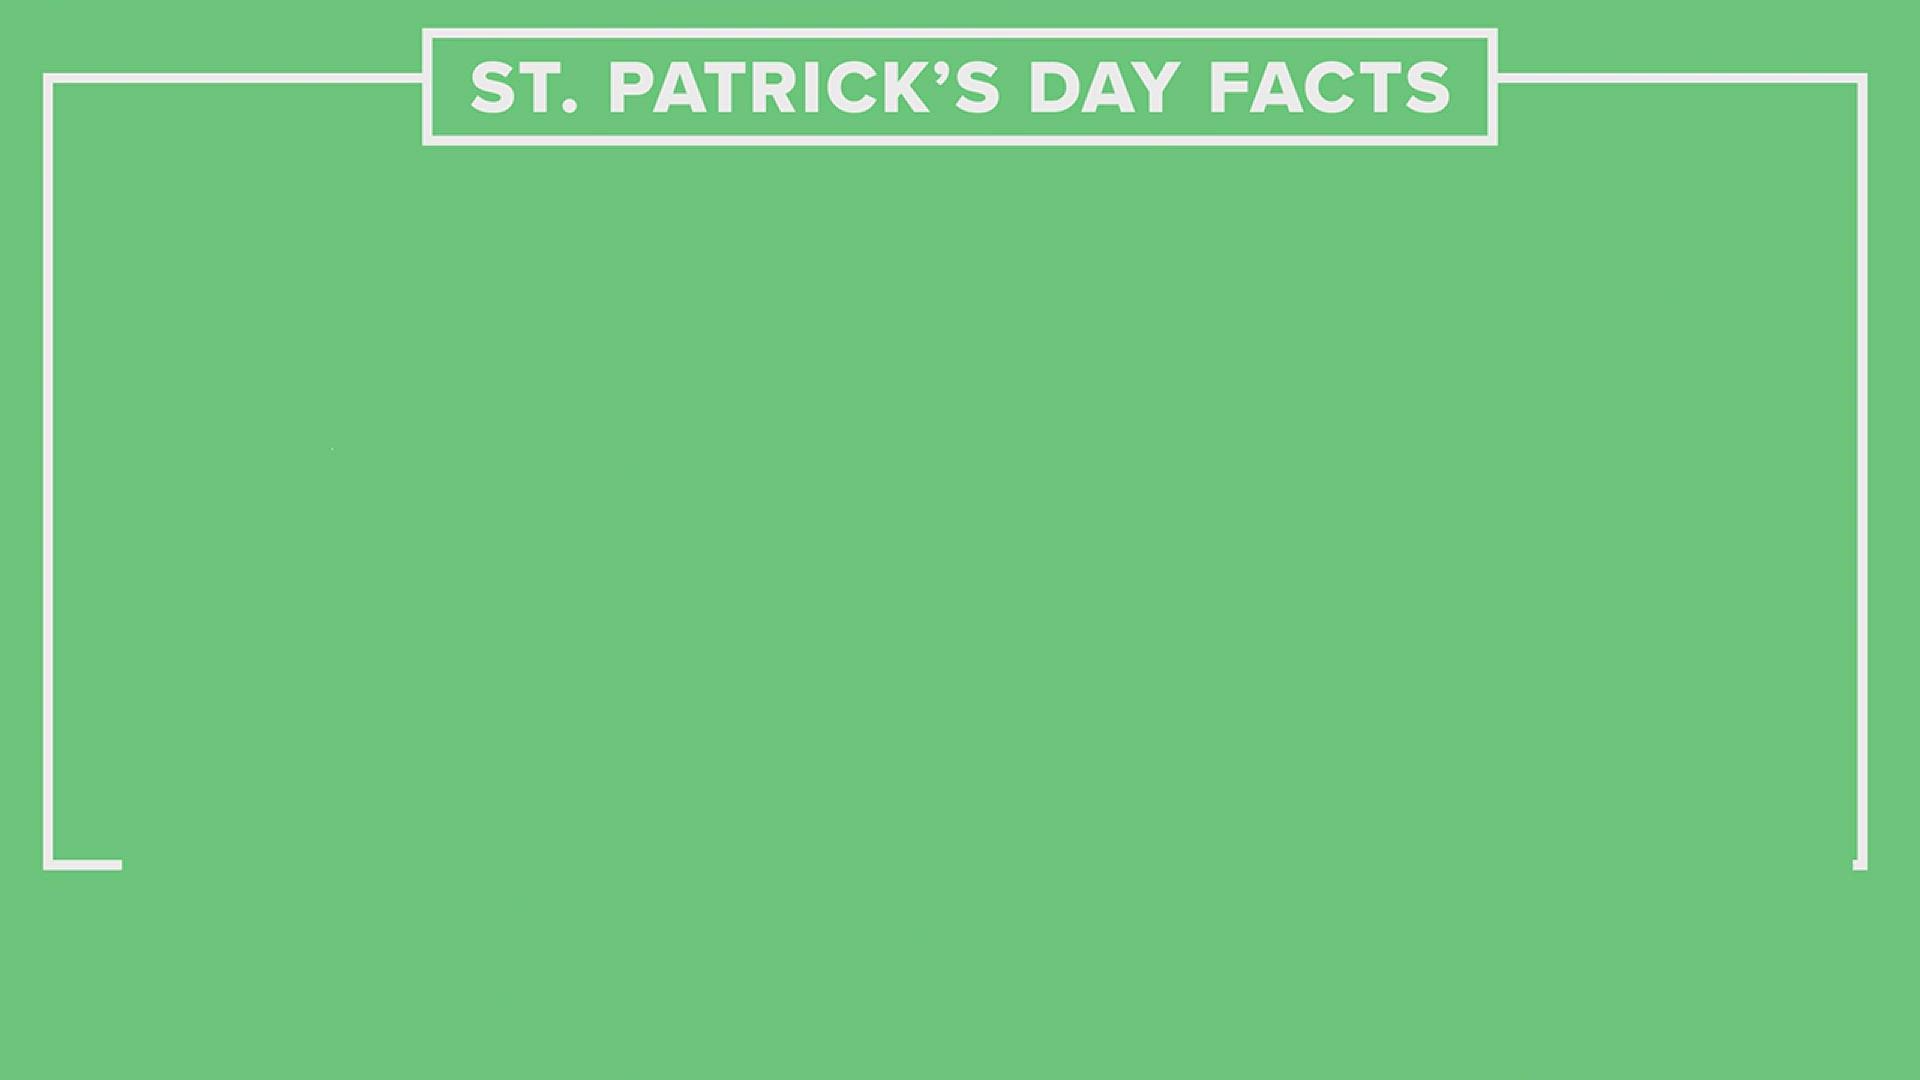 Here's some St. Patrick's Day facts!